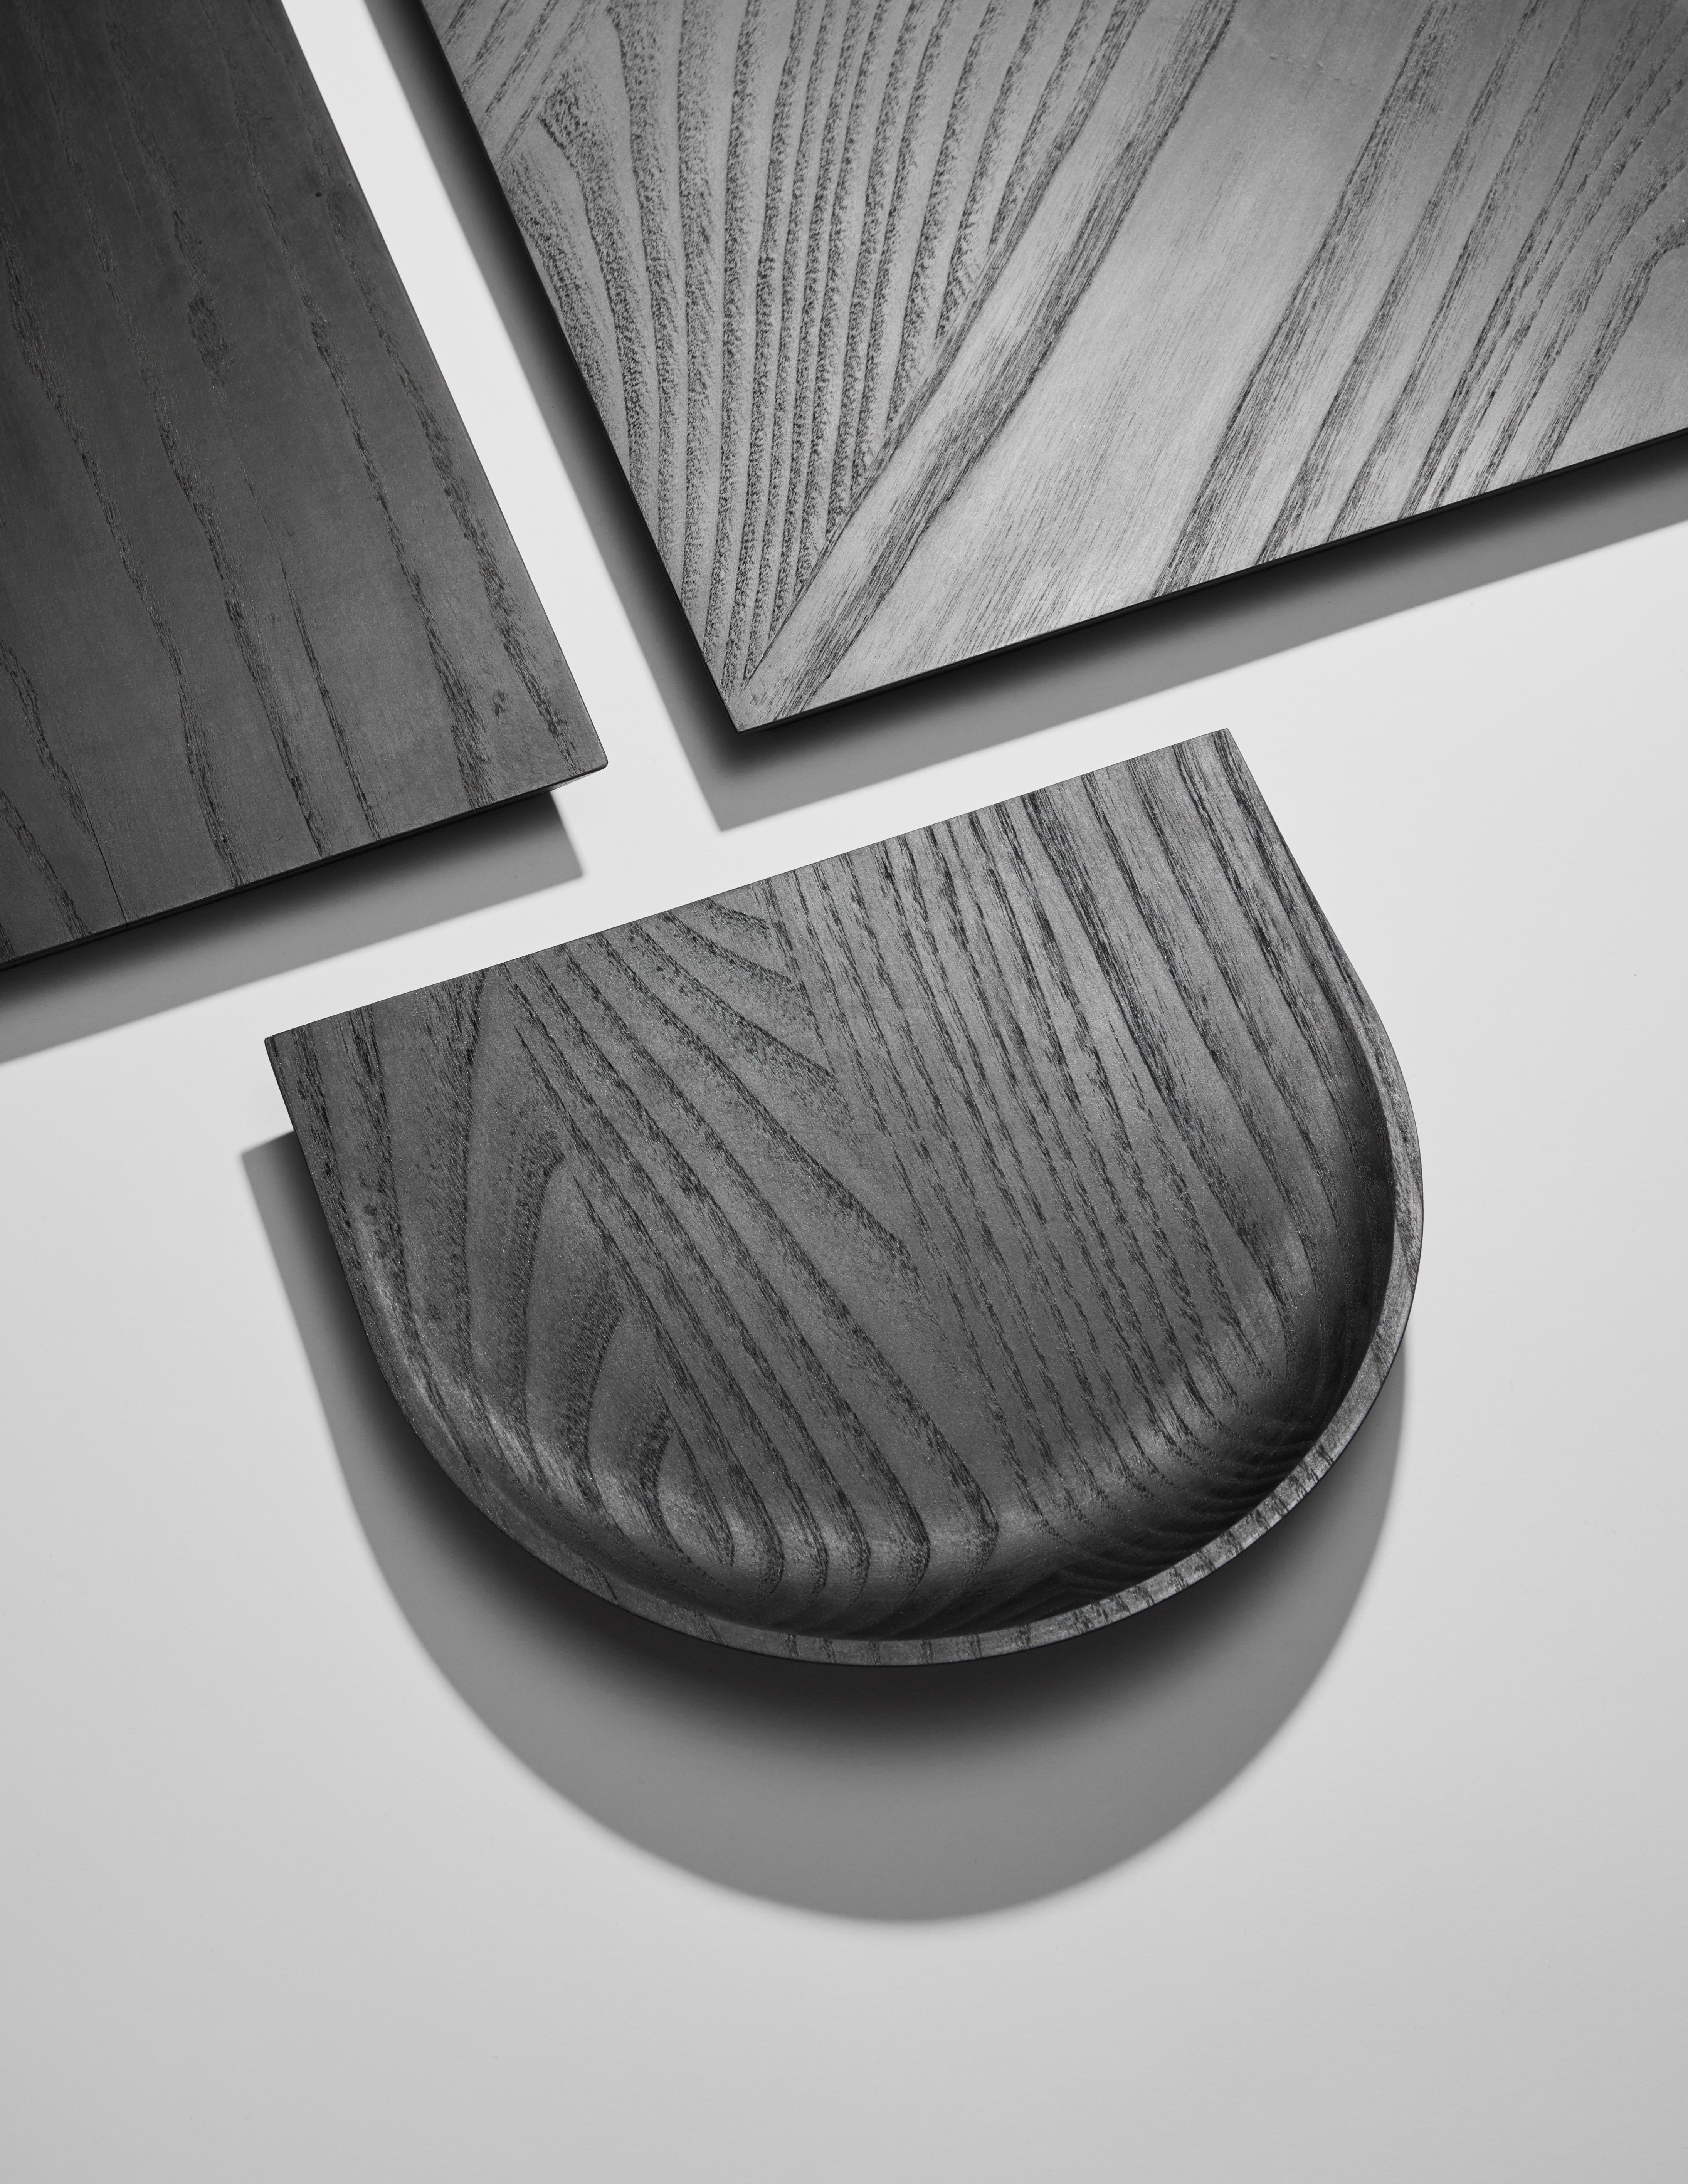 Stained Set of 3 Creux Trays by Clemence Birot